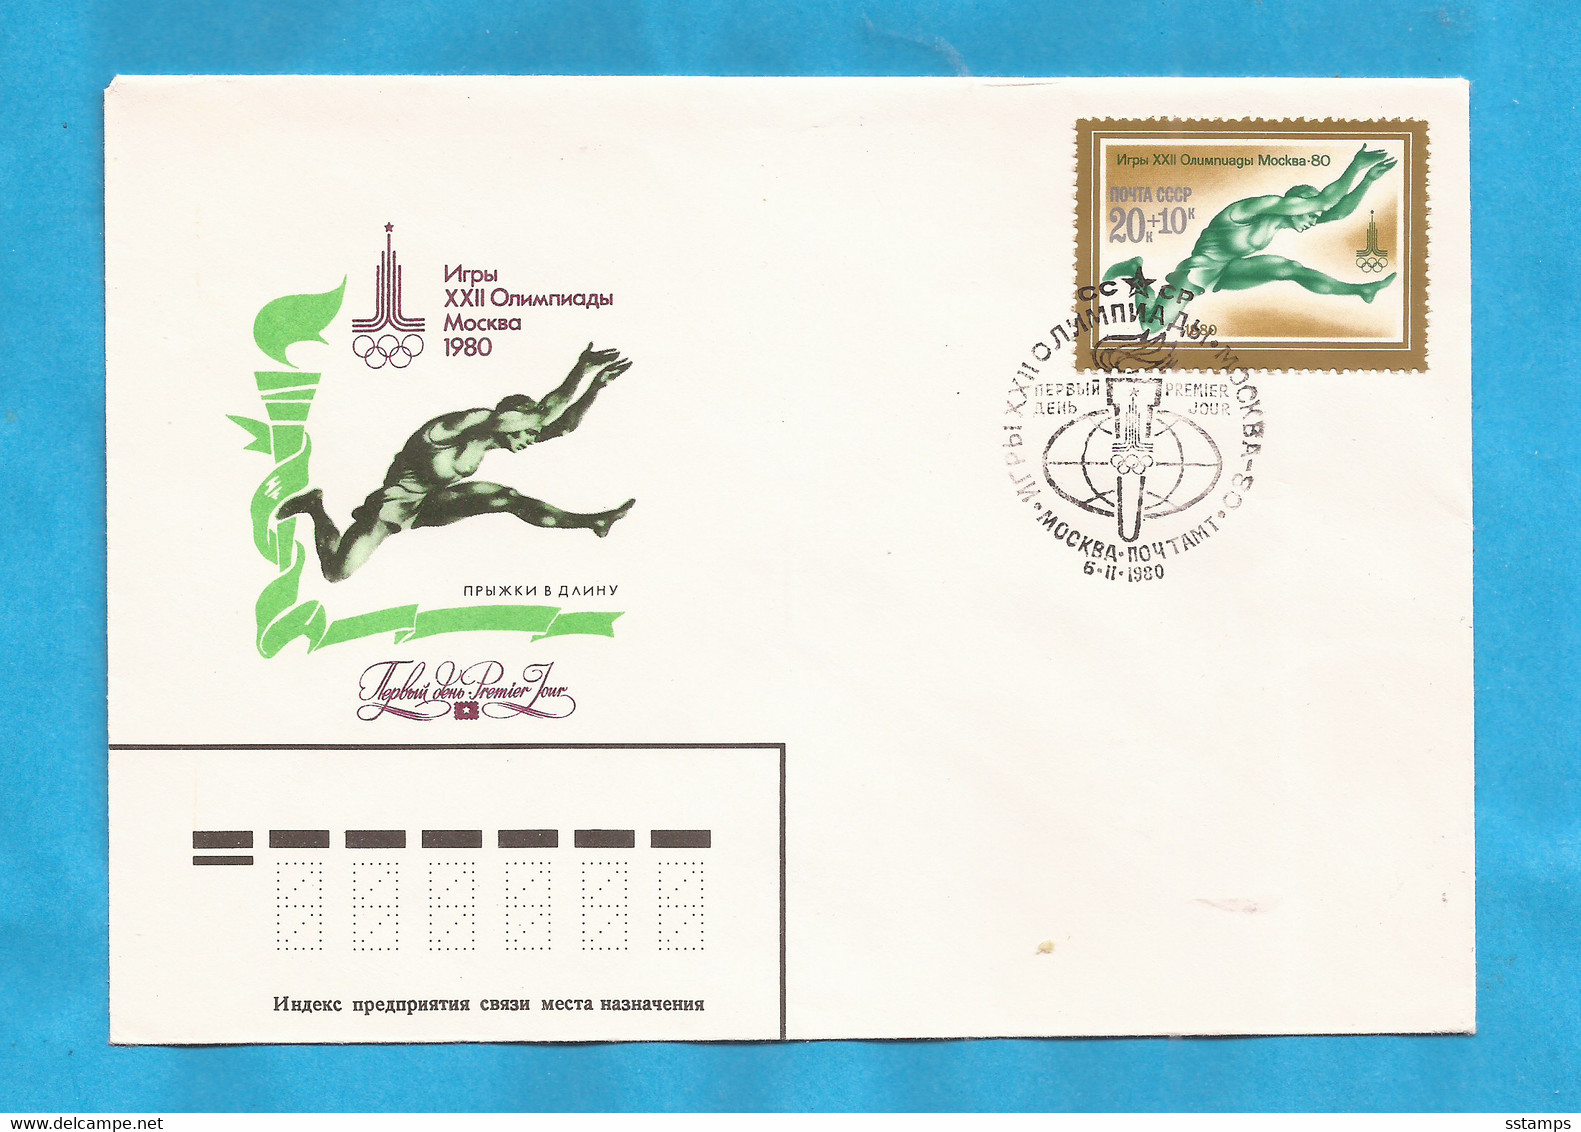 2021-02 -51 RUSSIA SSSR URSS  FDC BILLIG  INTERESSANT  EXCELLENT QUALITY FOR THE COLLECTION  MNH - Salto